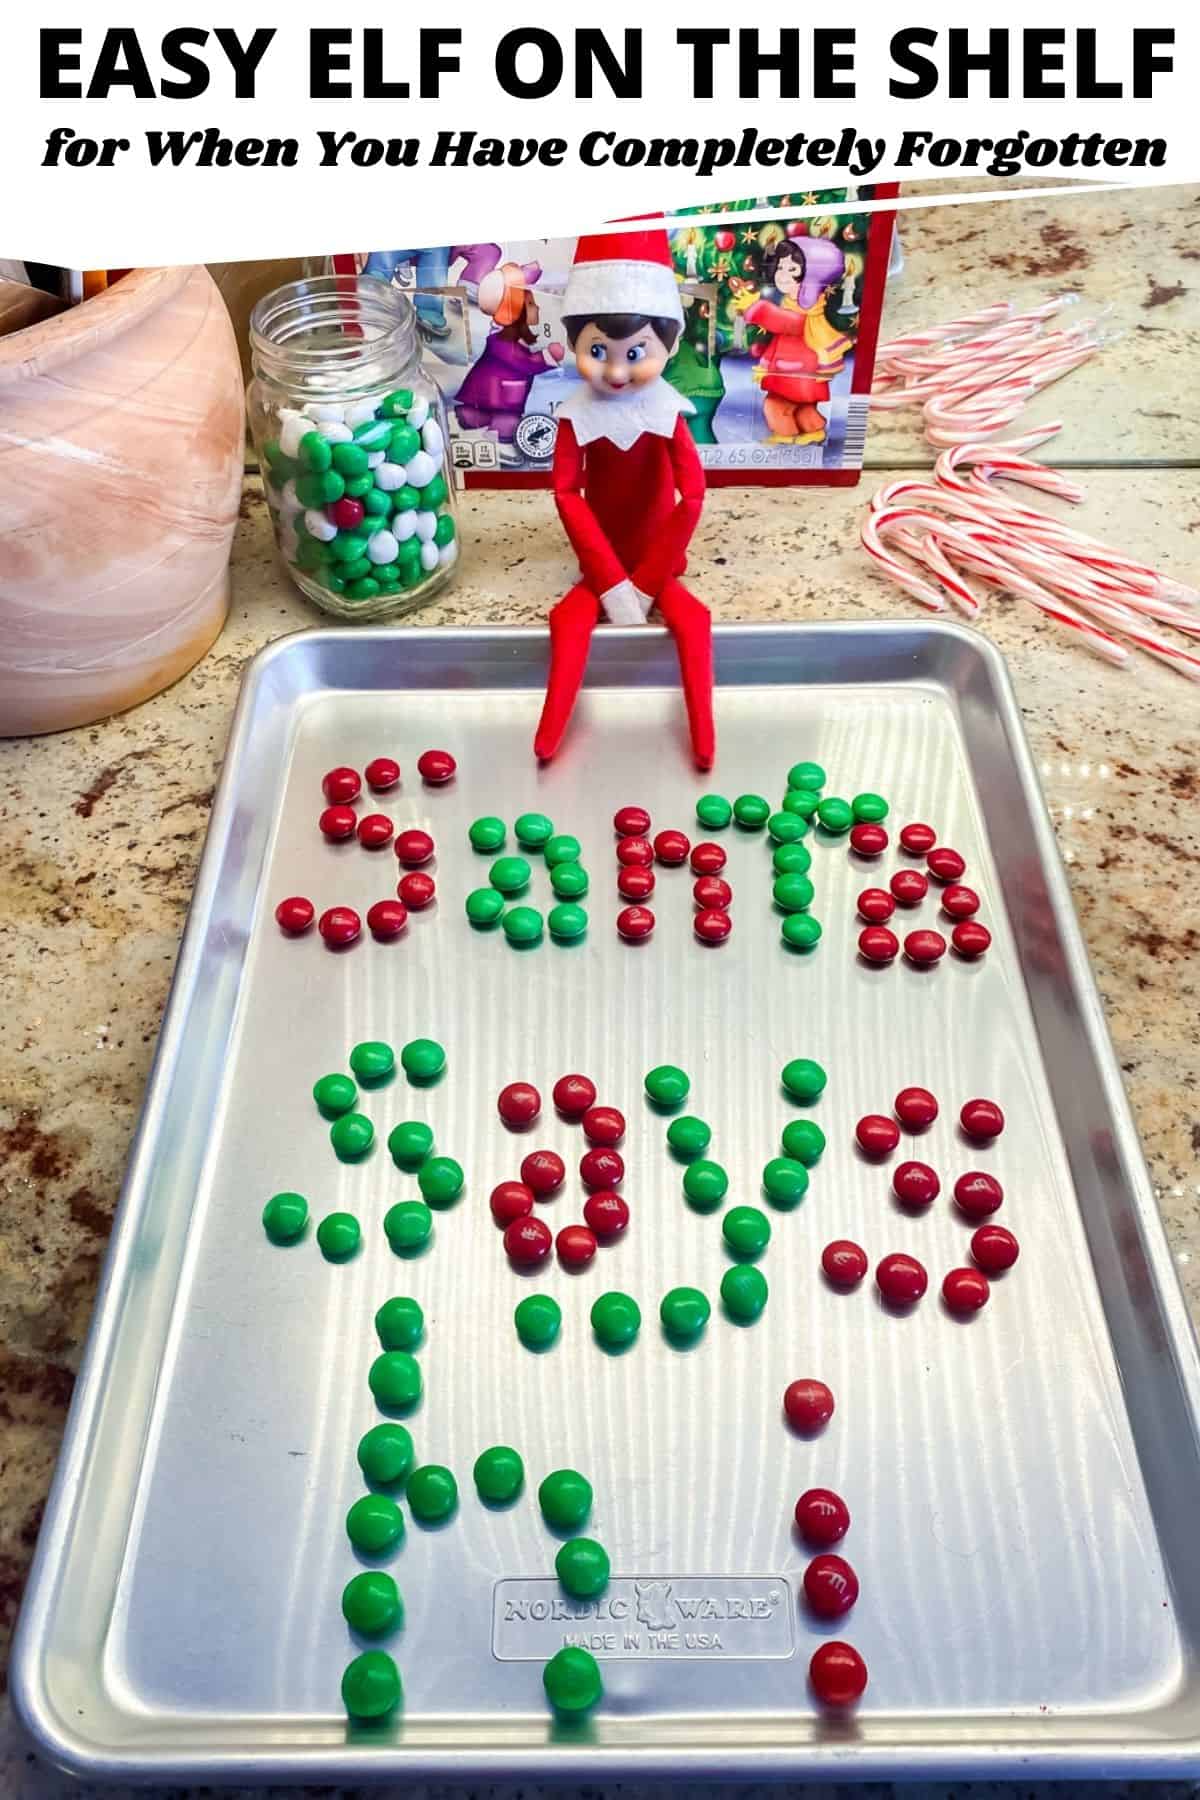 Elf on the shelf ideas for when you have forgotten